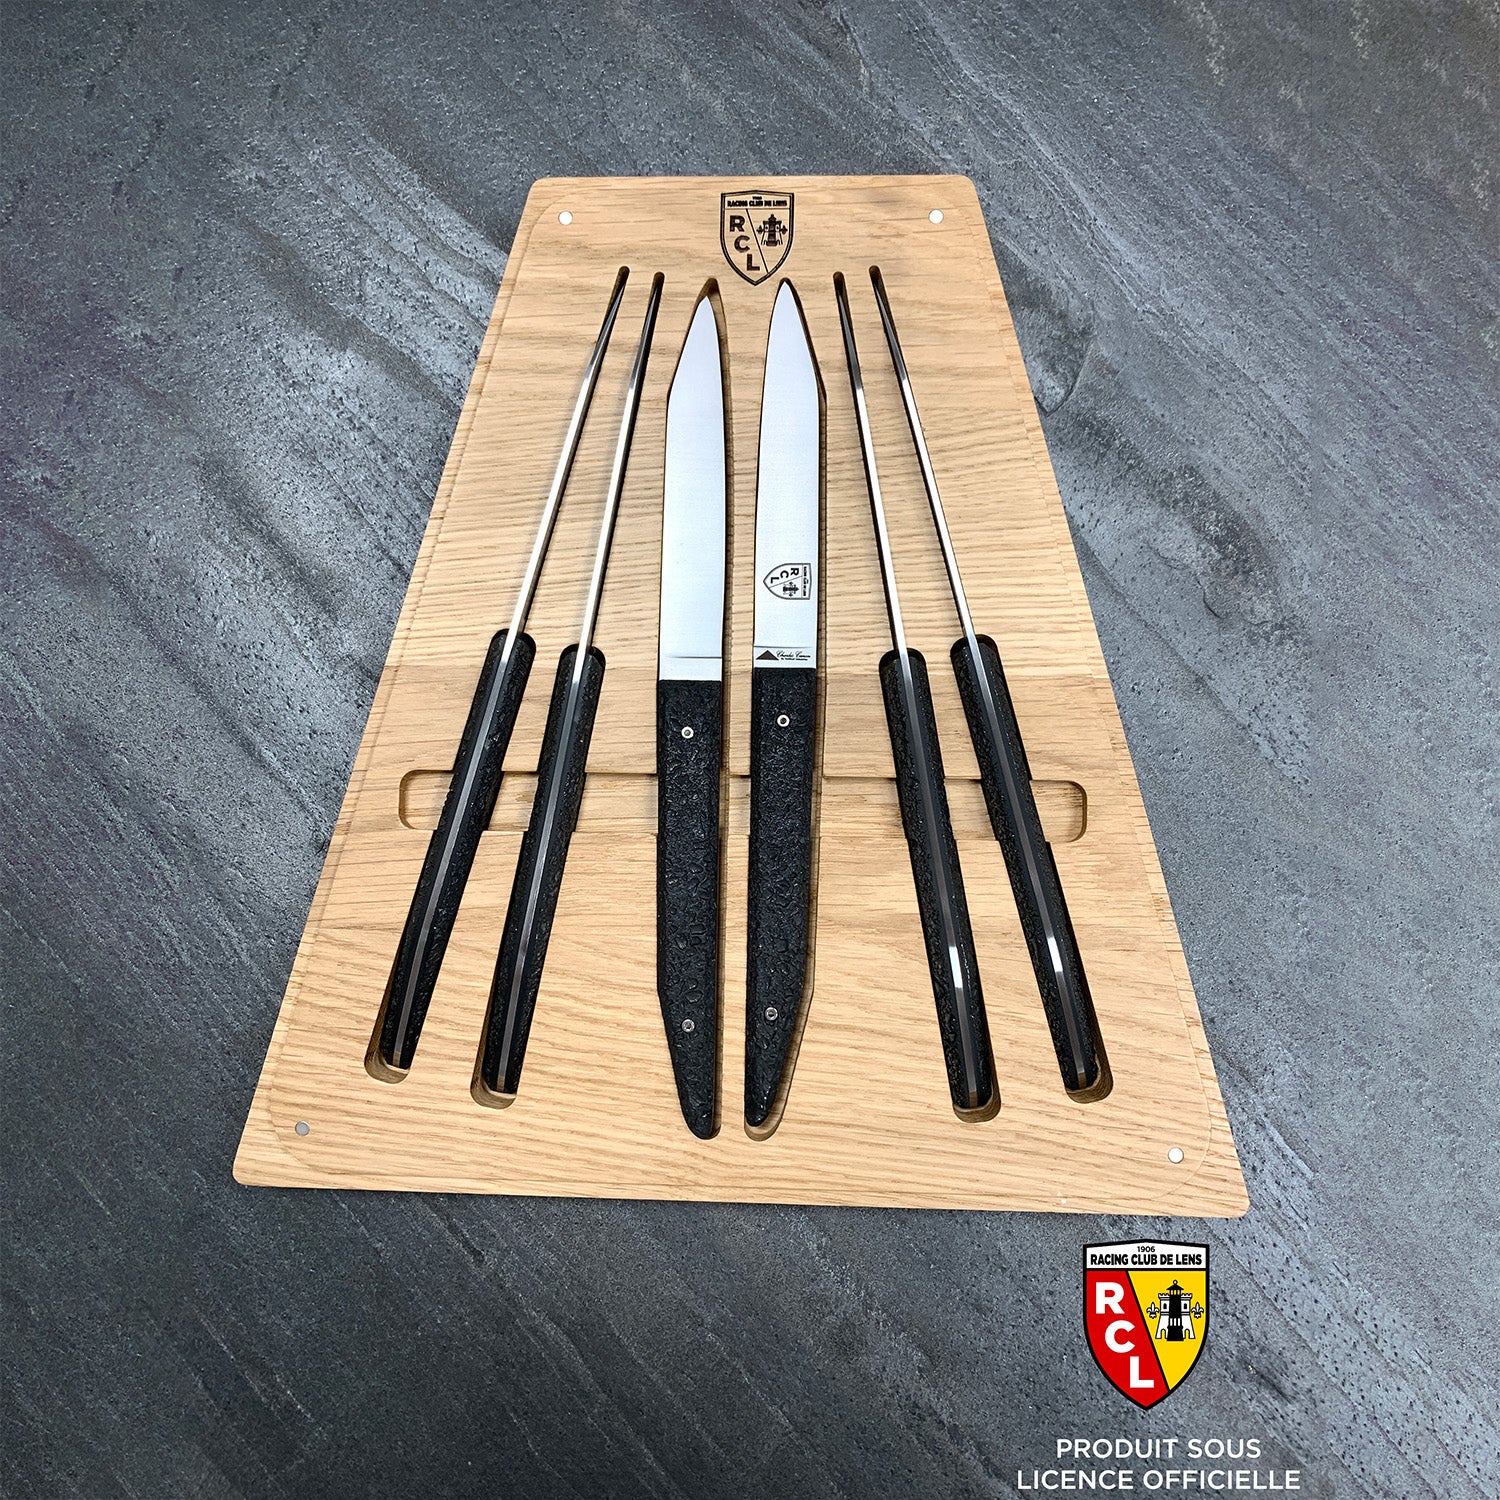 Box of 6 BLACK edition table knives (UNDER OFFICIAL LICENSE)